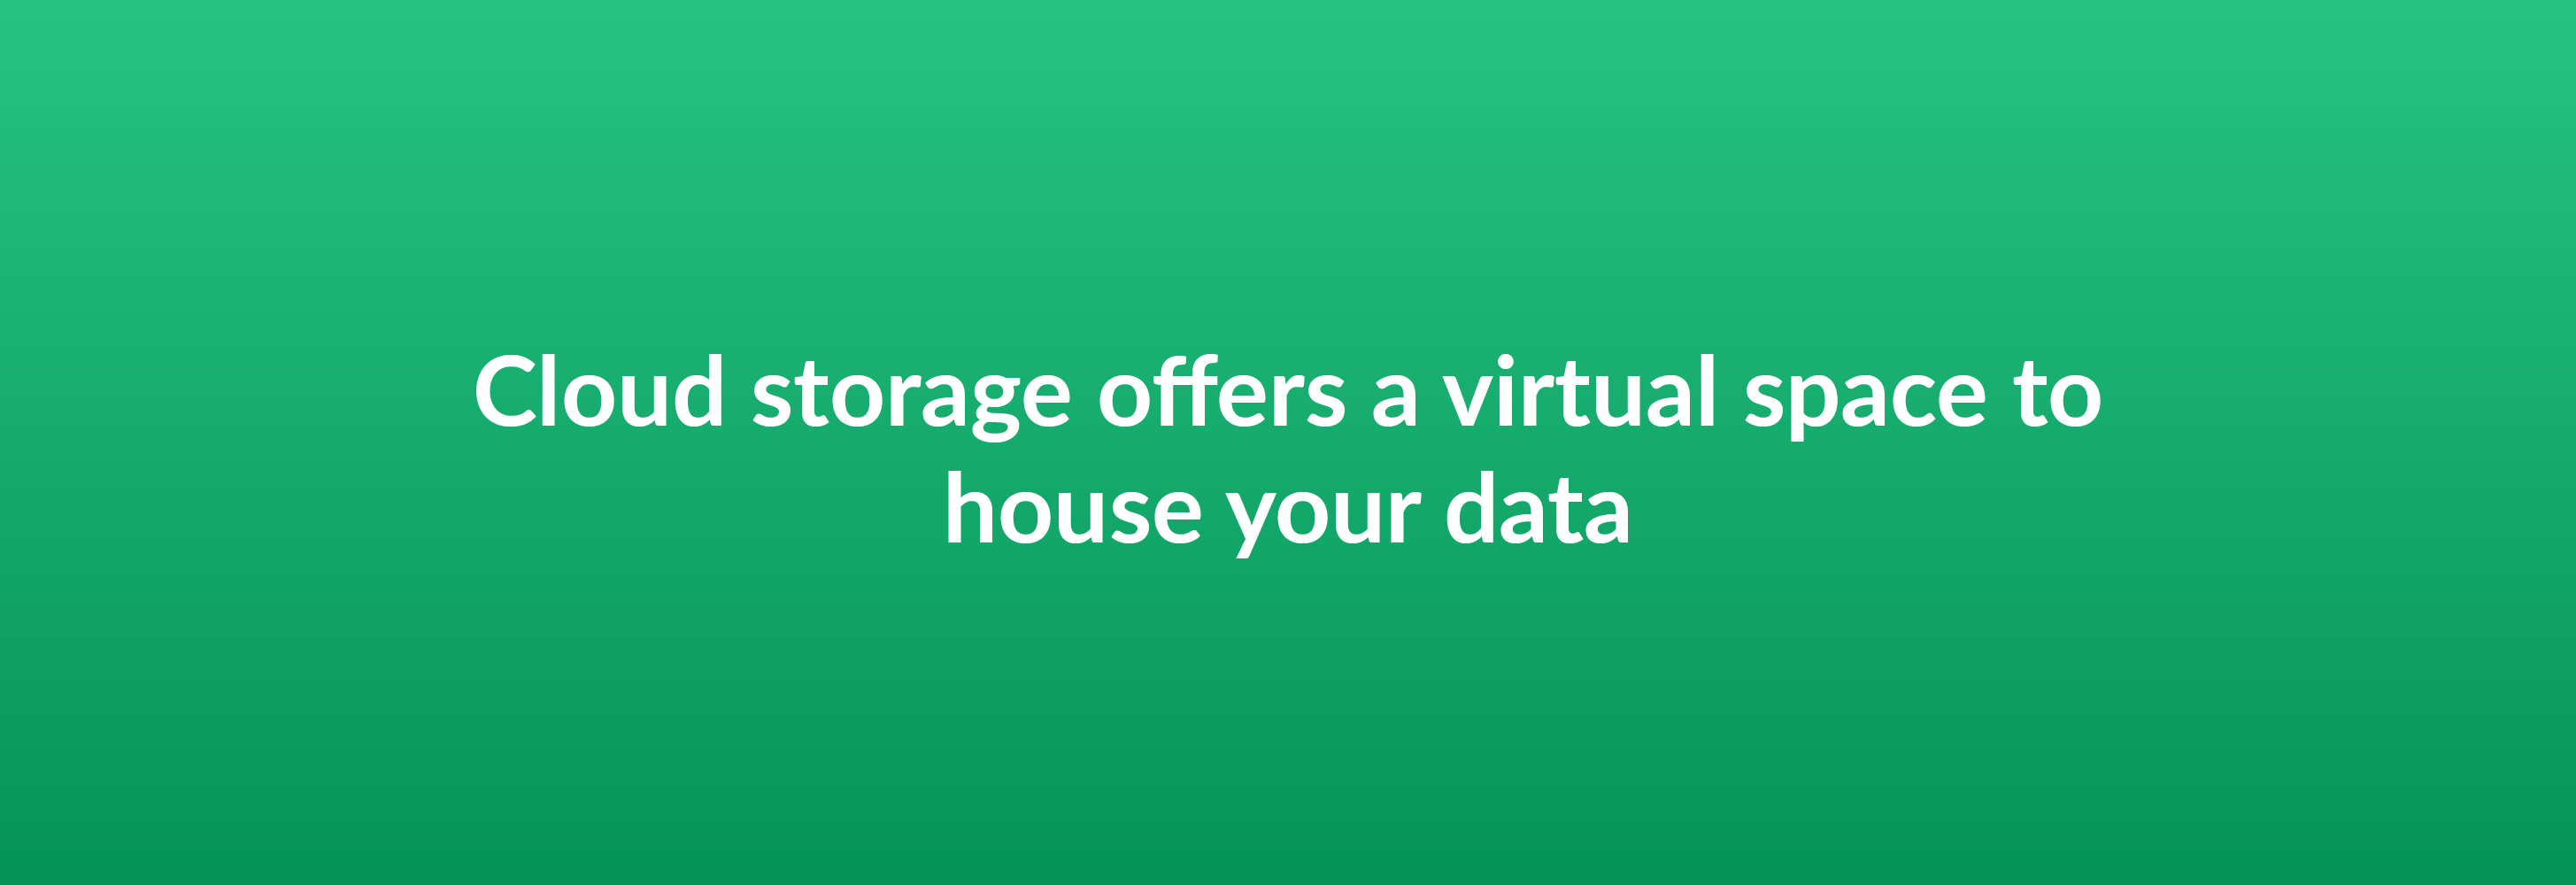 Cloud storage offers a virtual space to house your data